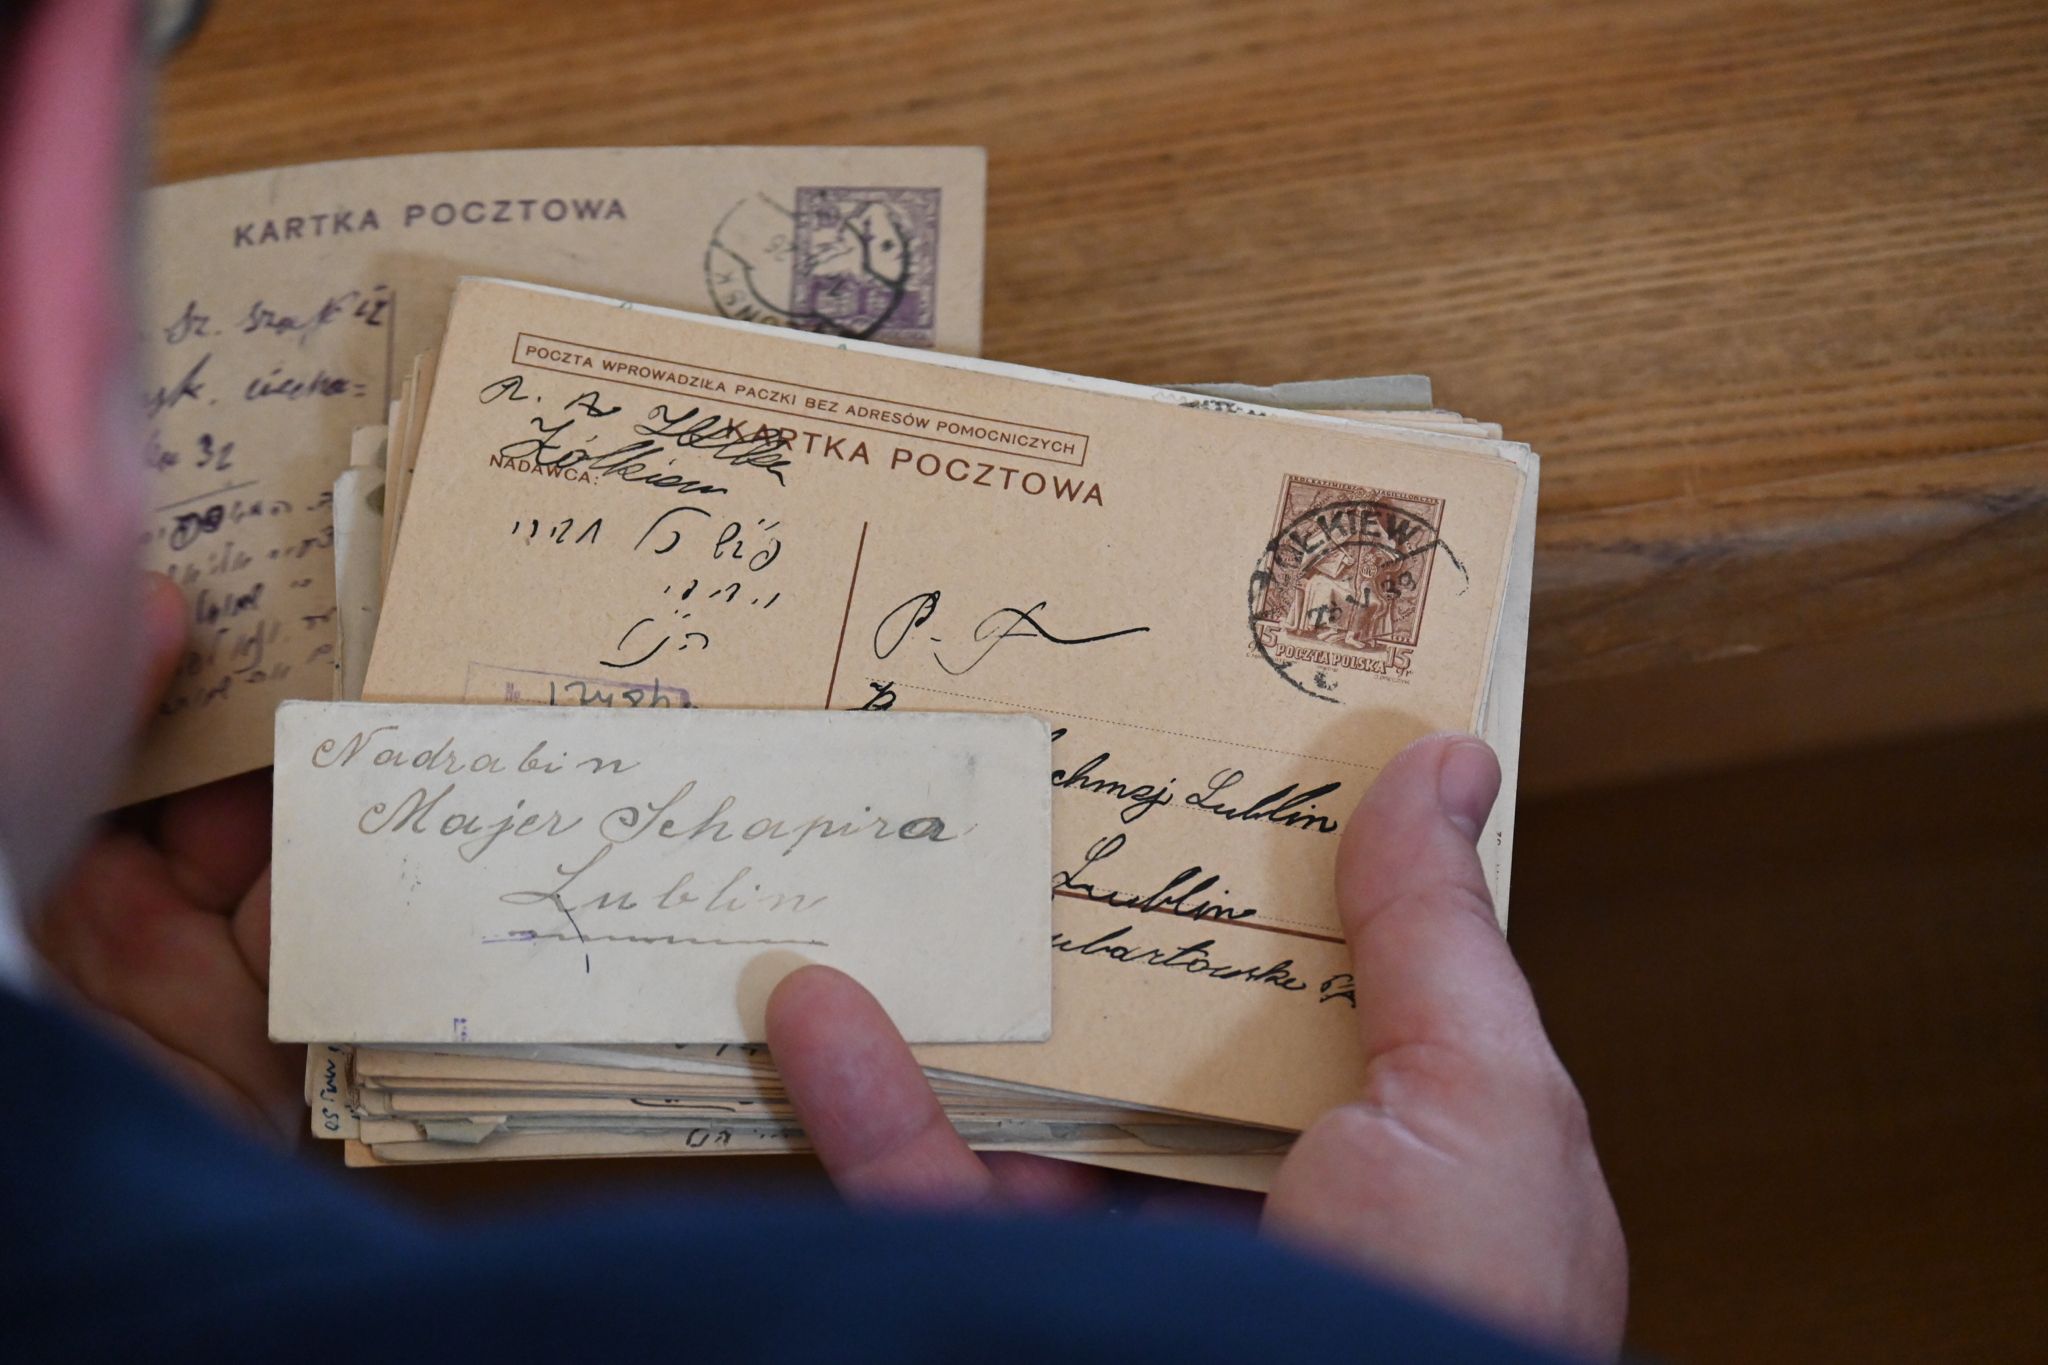 A German soldier looted postcards from doomed Jews in Poland. 80 years later, his granddaughter brought them back.